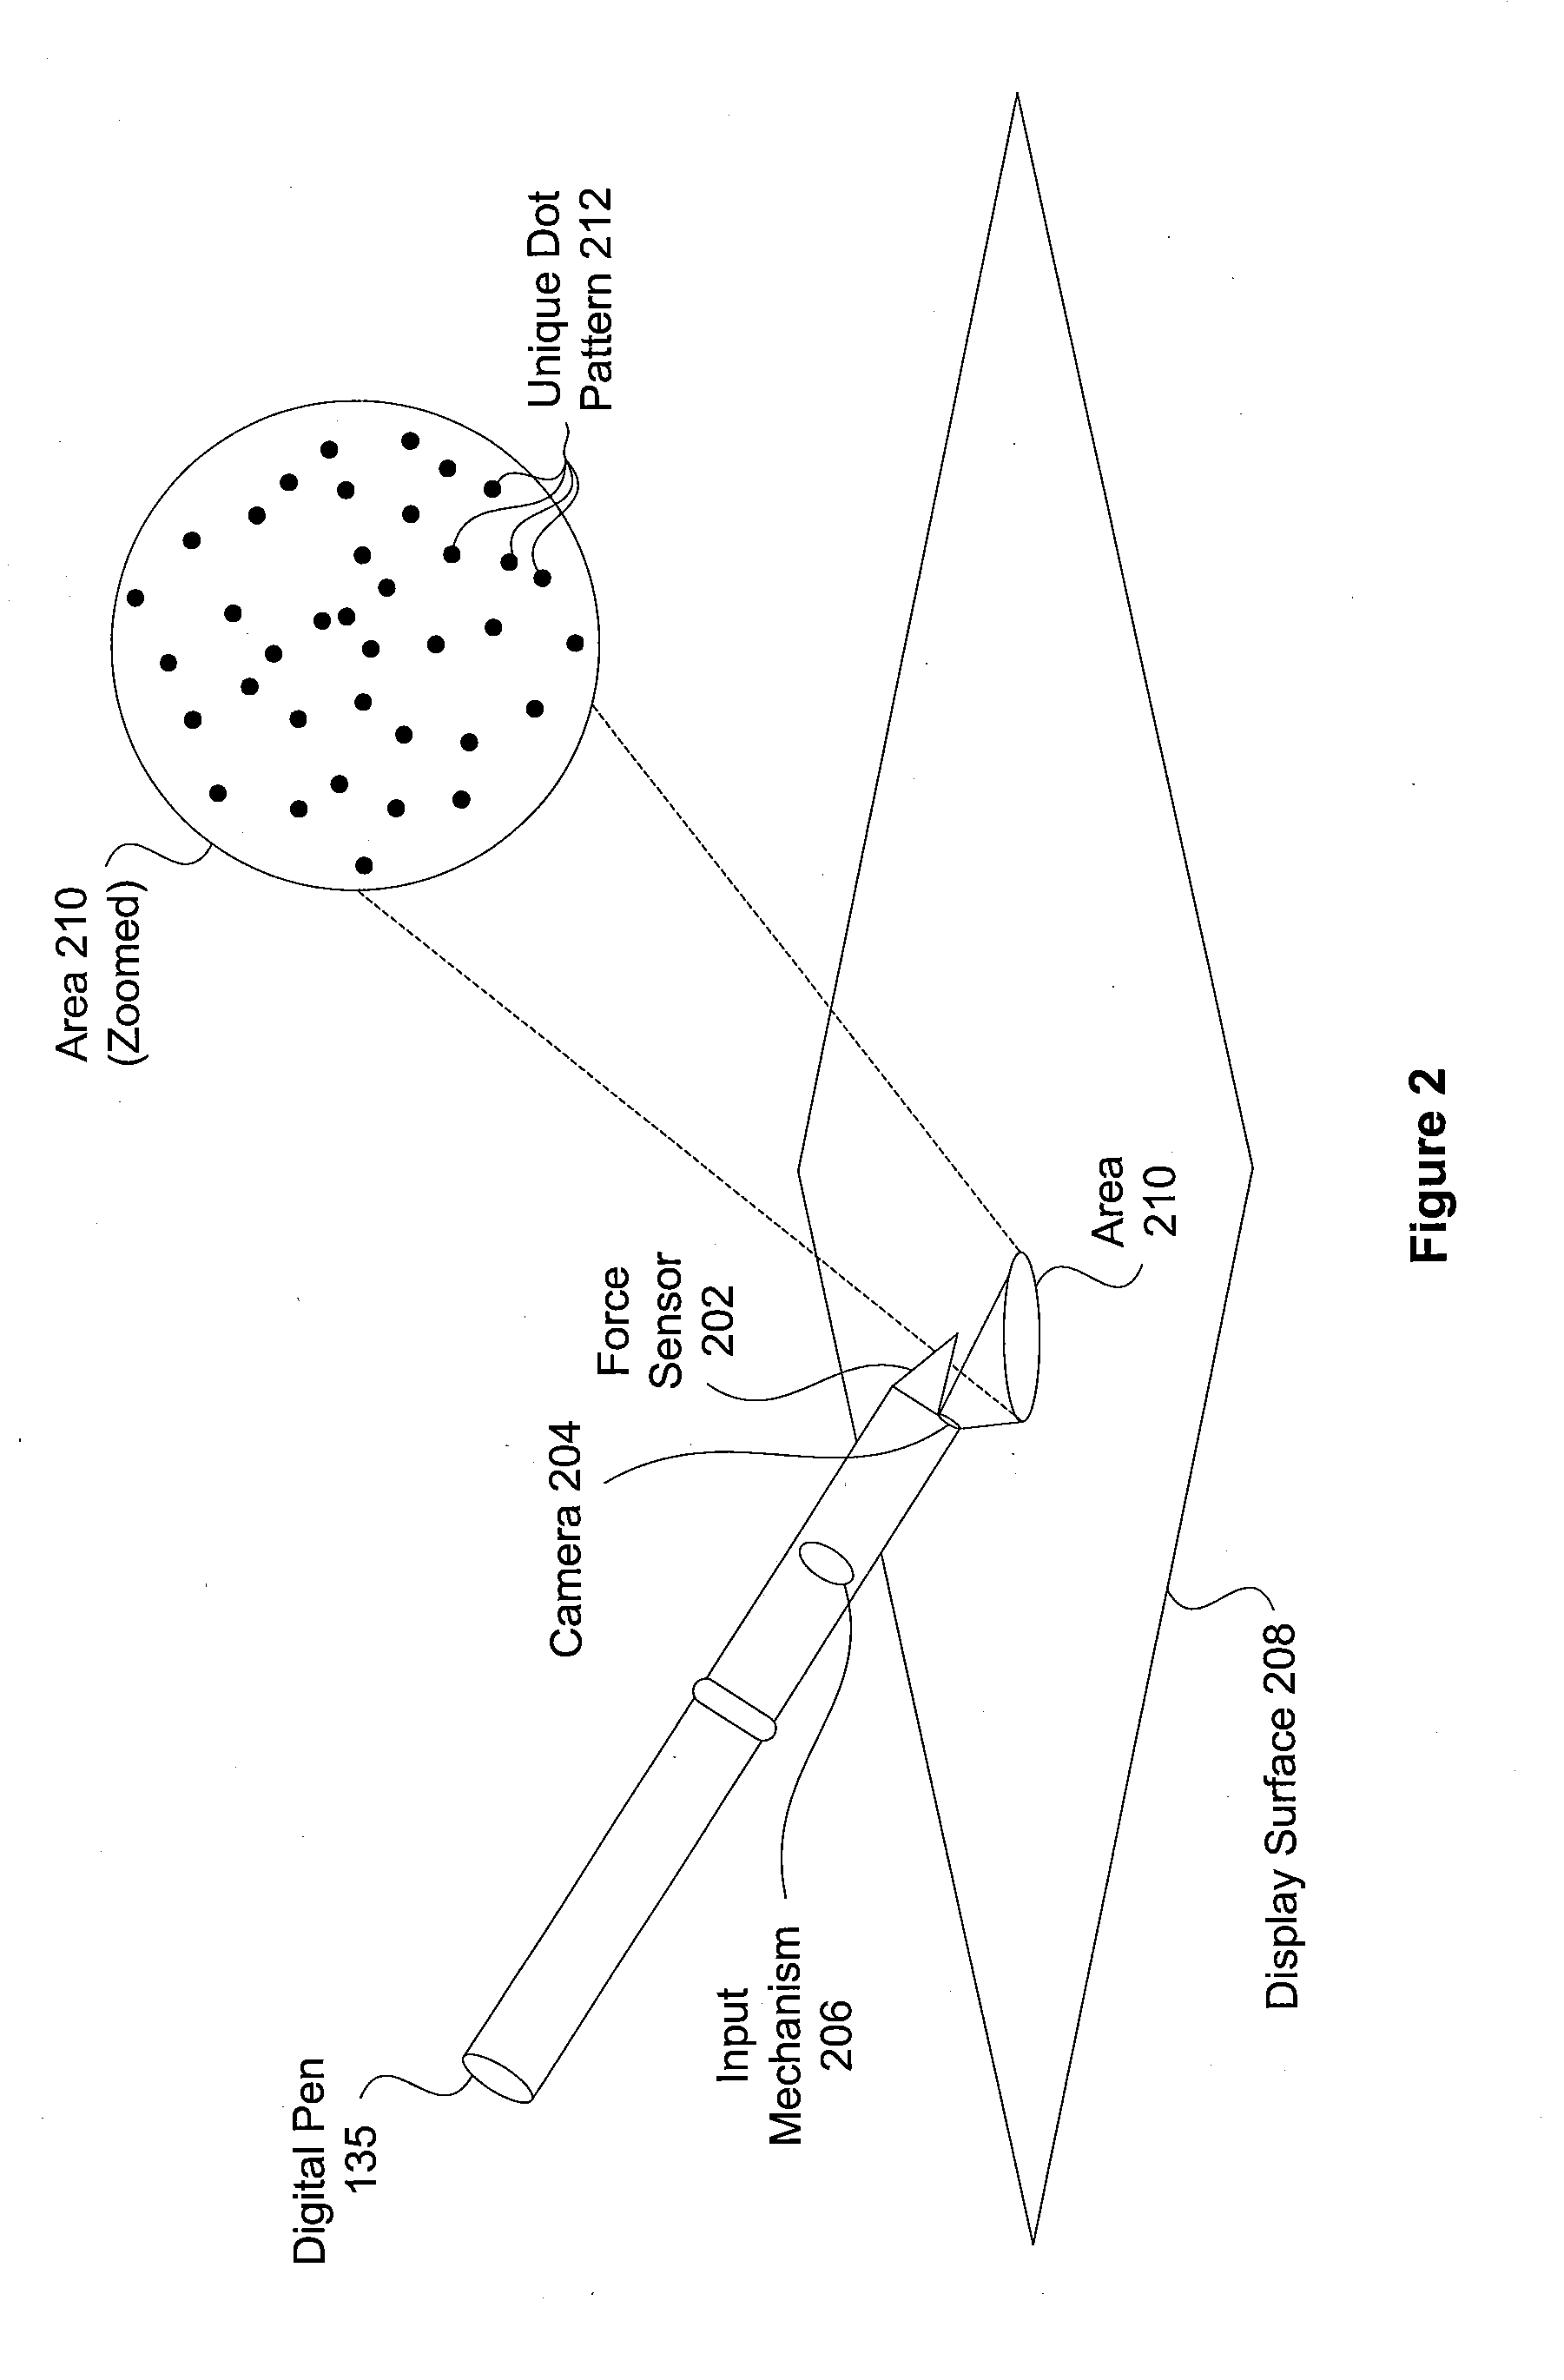 Bimanual interactions on digital paper using a pen and a spatially-aware mobile projector